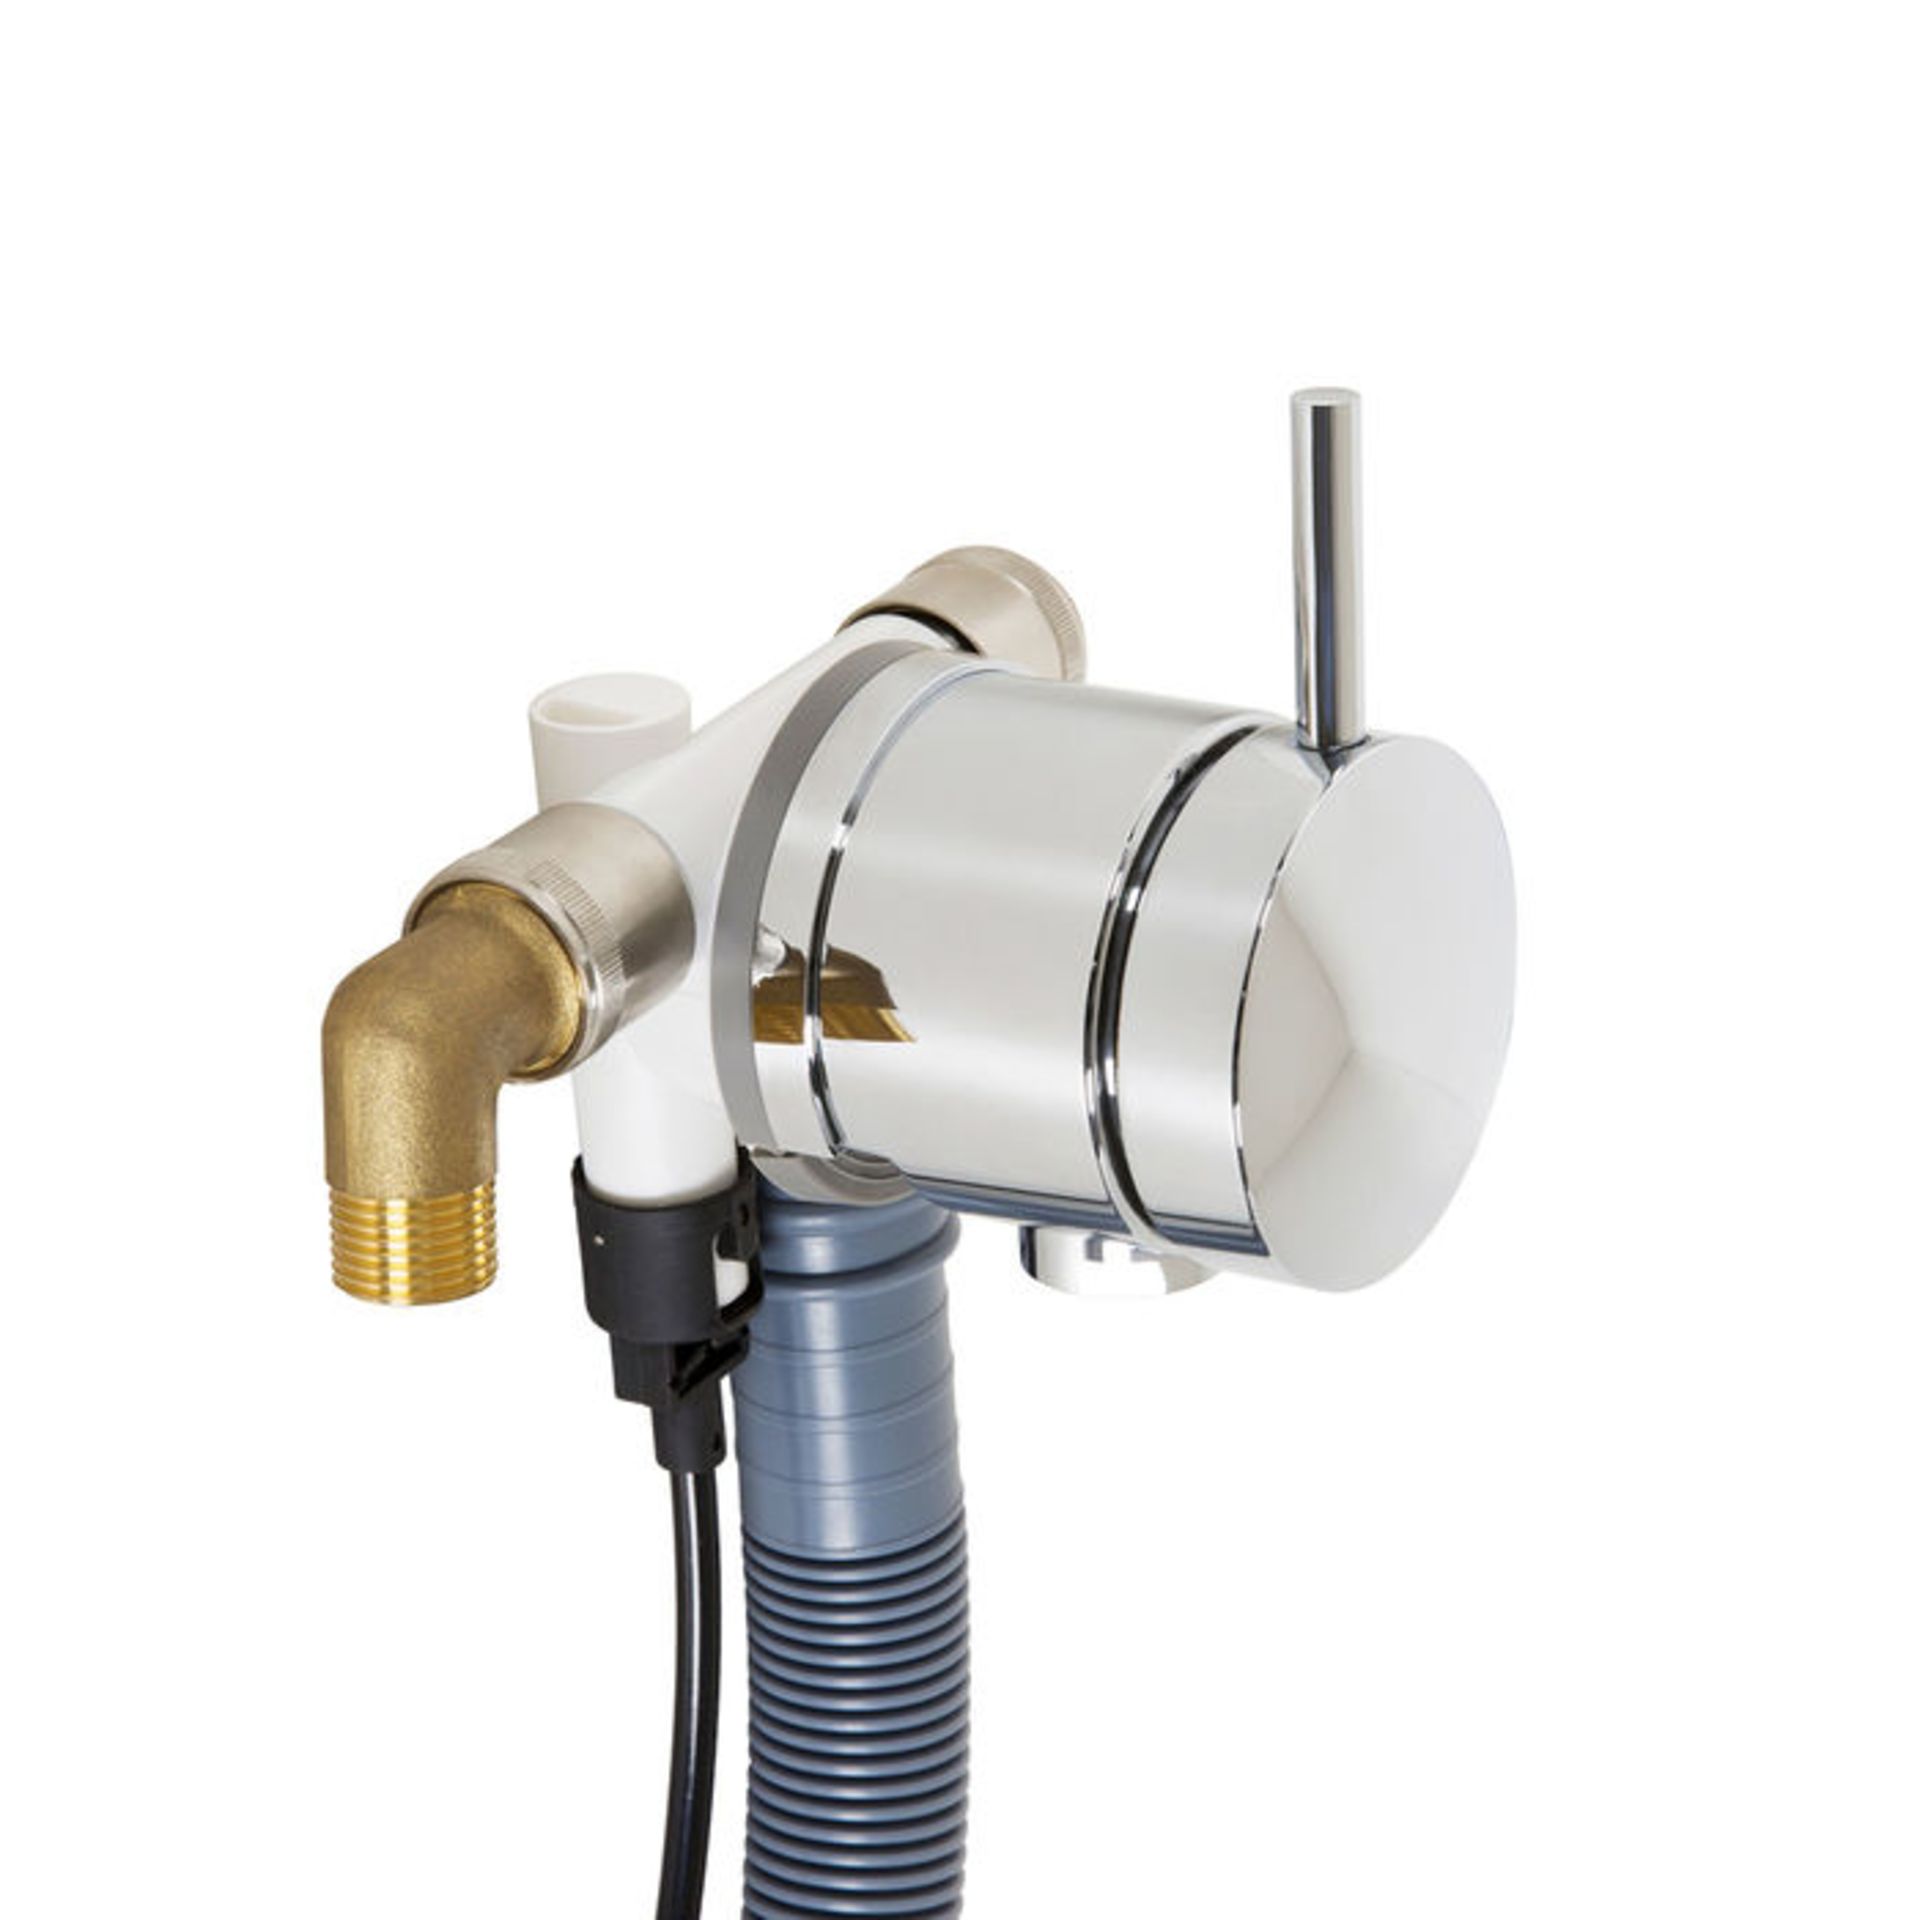 (PA34) Bath Filler Waste Overflow Kit - Pop-Up Made with zinc with solid brass components Standard - Image 3 of 4